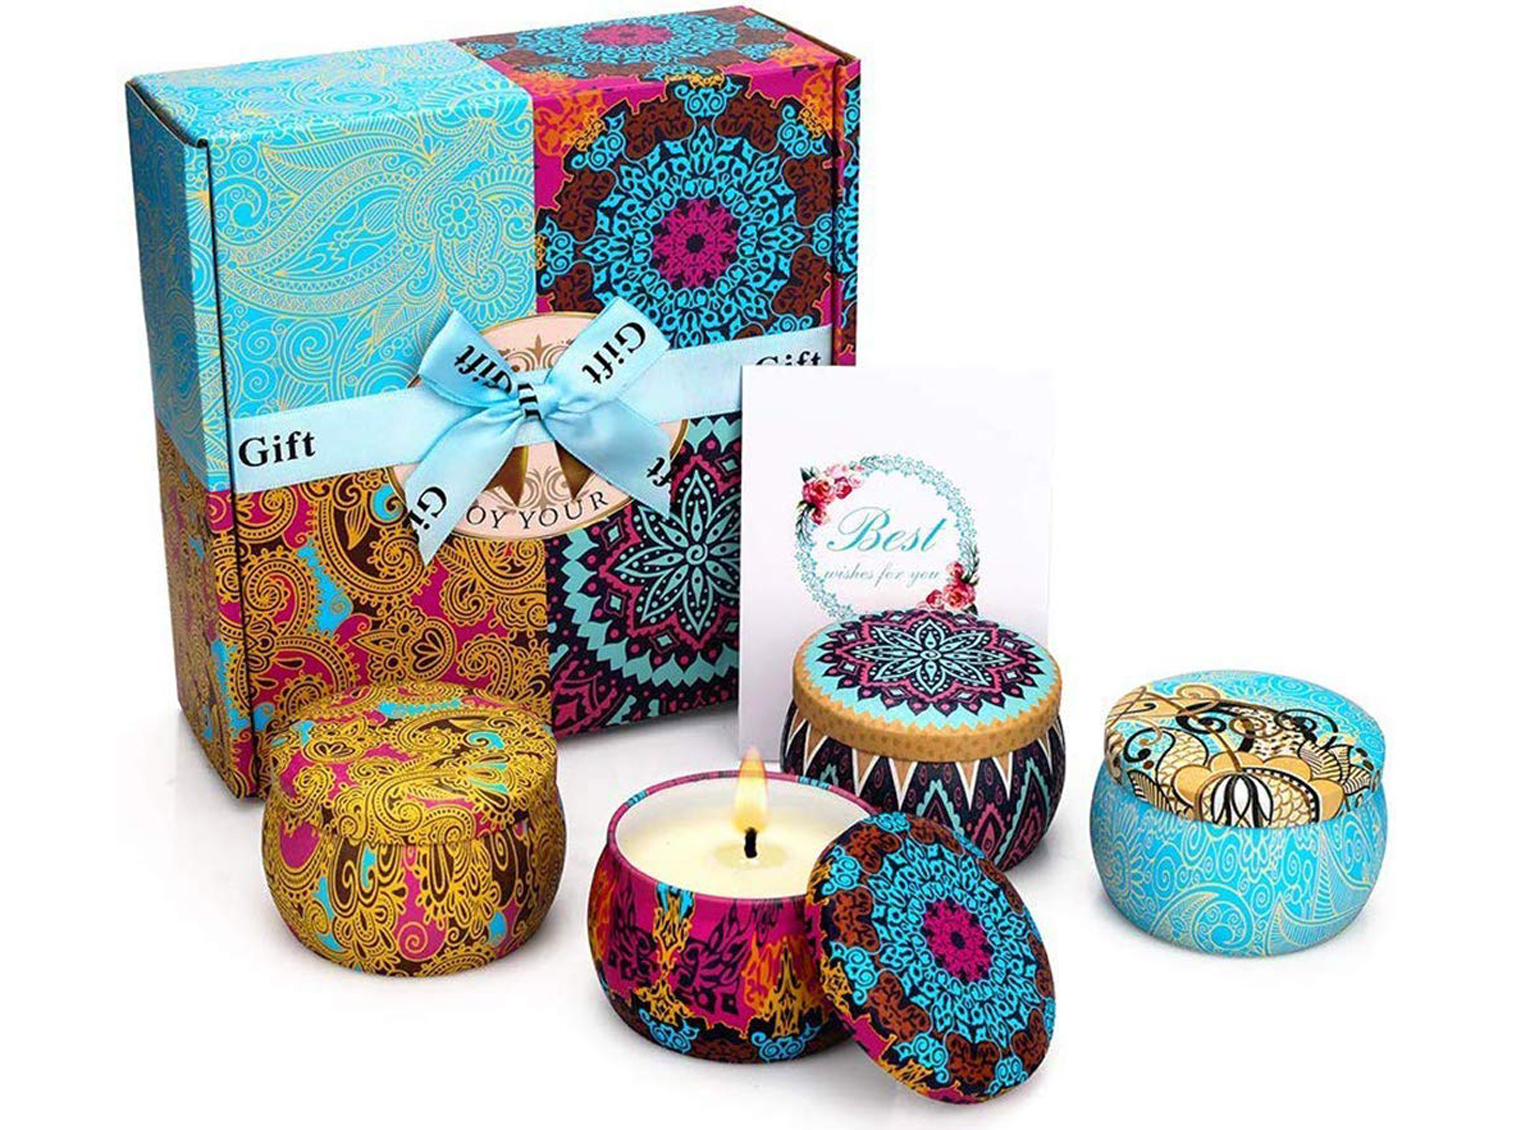 Scented candles. 20 Unexpected and Creative Gift Ideas for Best Friends - 34